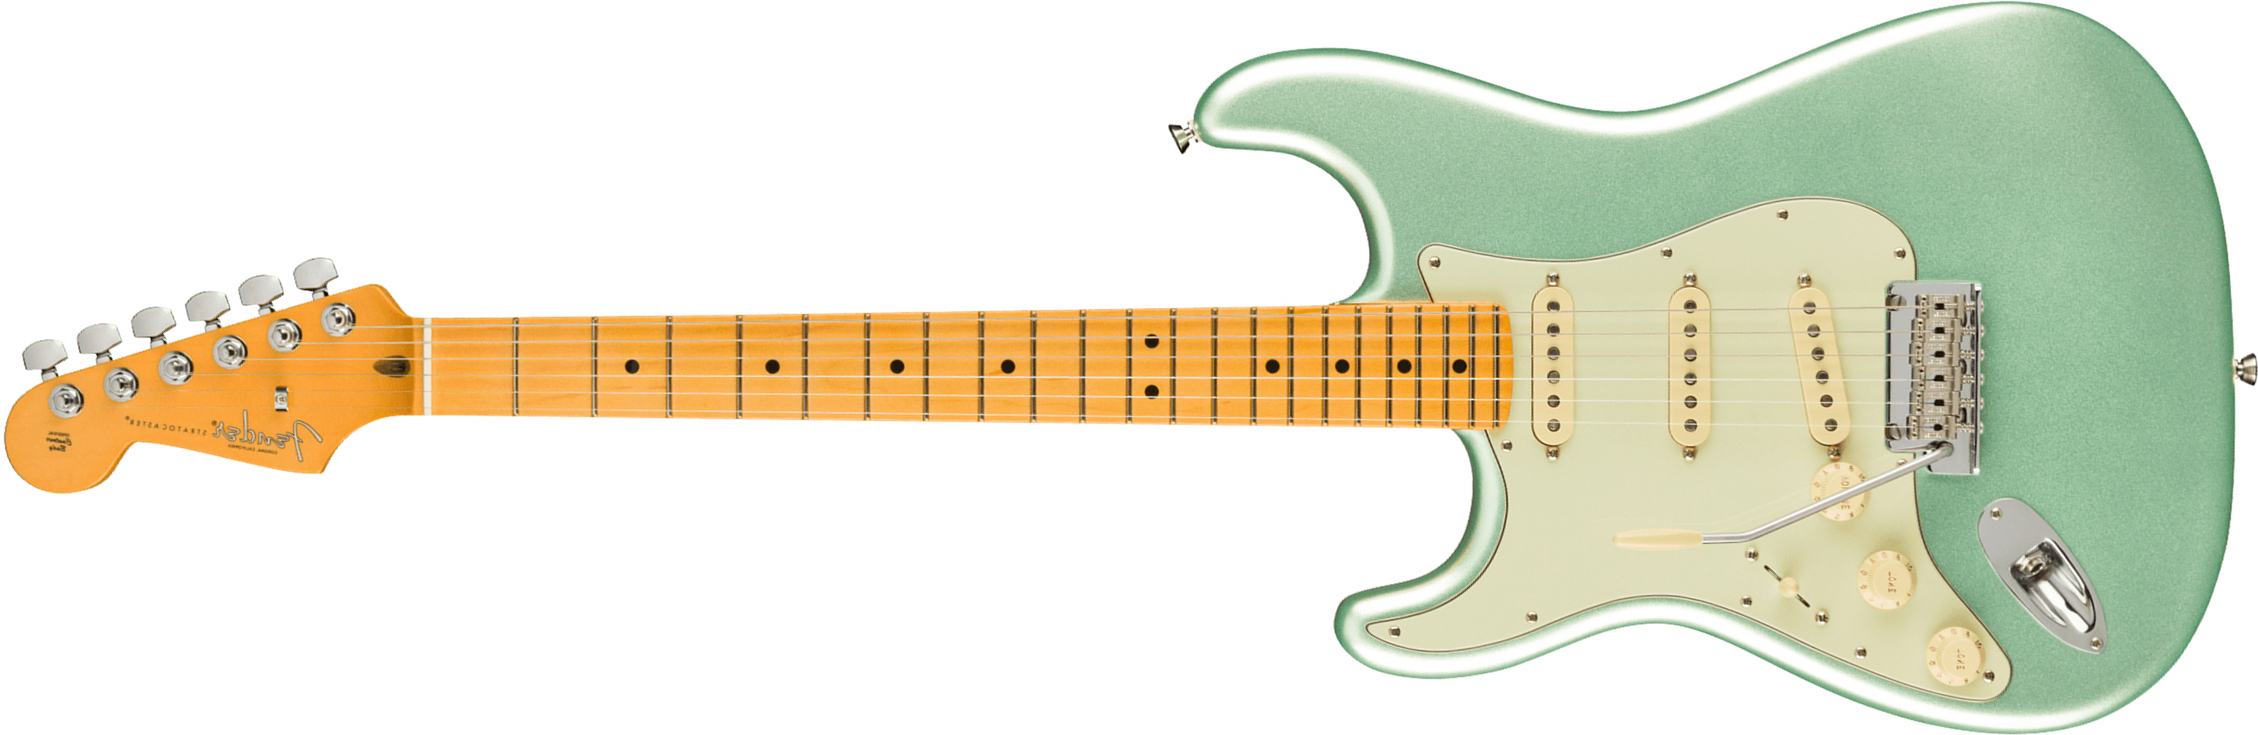 Fender Strat American Professional Ii Lh Gaucher Usa Mn - Mystic Surf Green - Left-handed electric guitar - Main picture